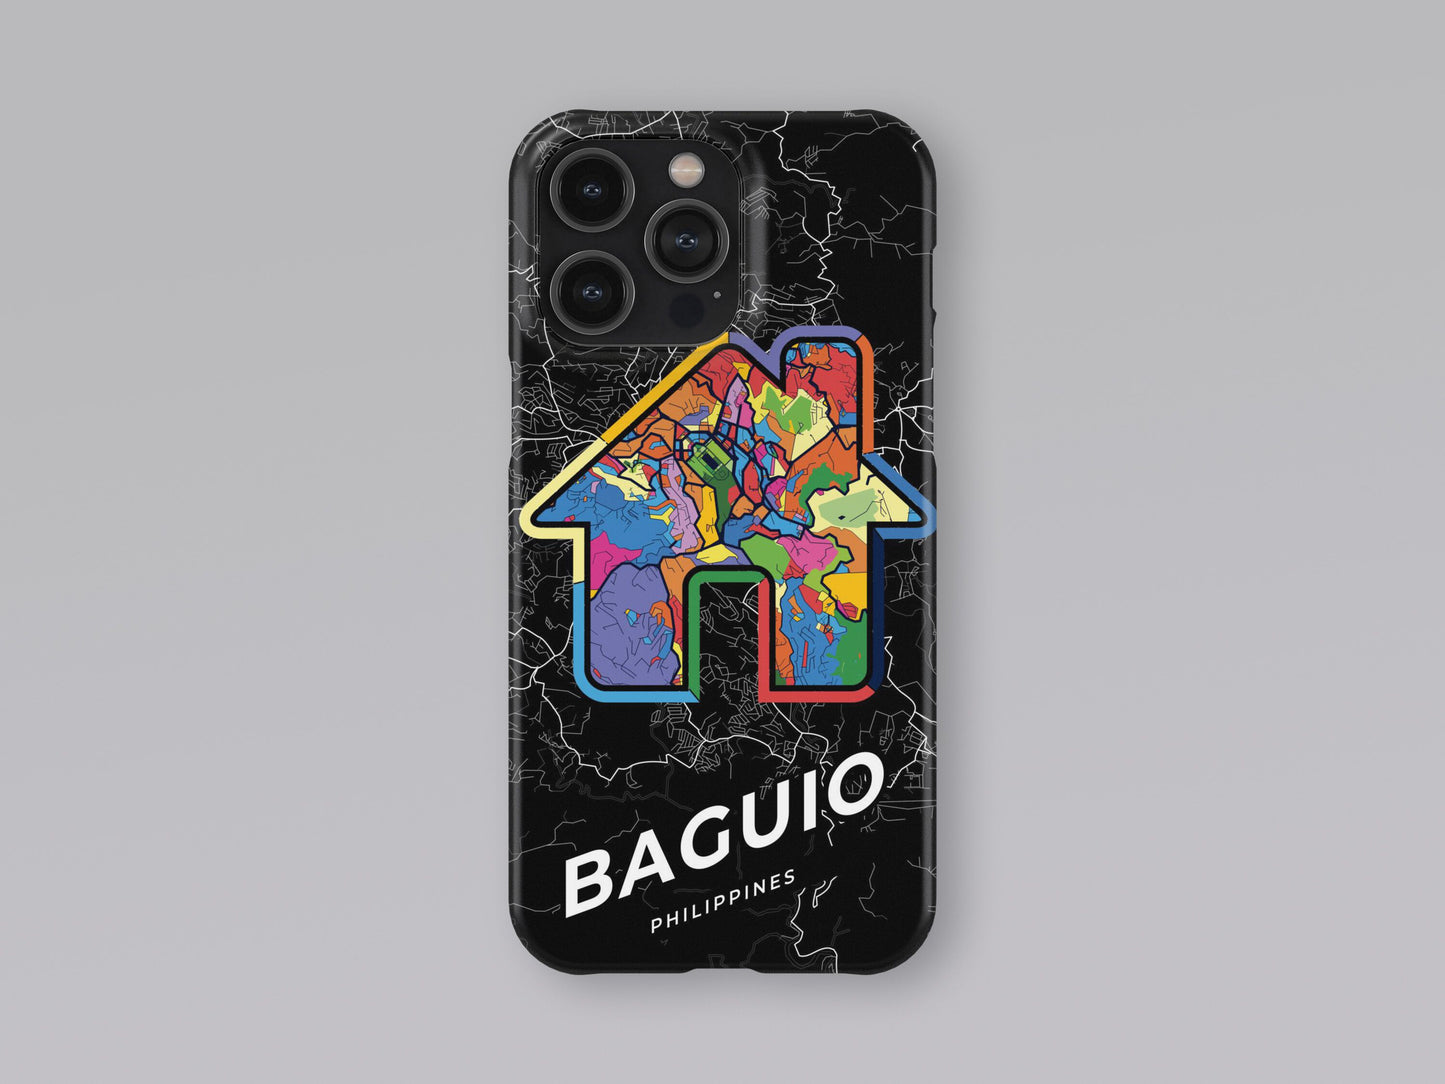 Baguio Philippines slim phone case with colorful icon. Birthday, wedding or housewarming gift. Couple match cases. 3